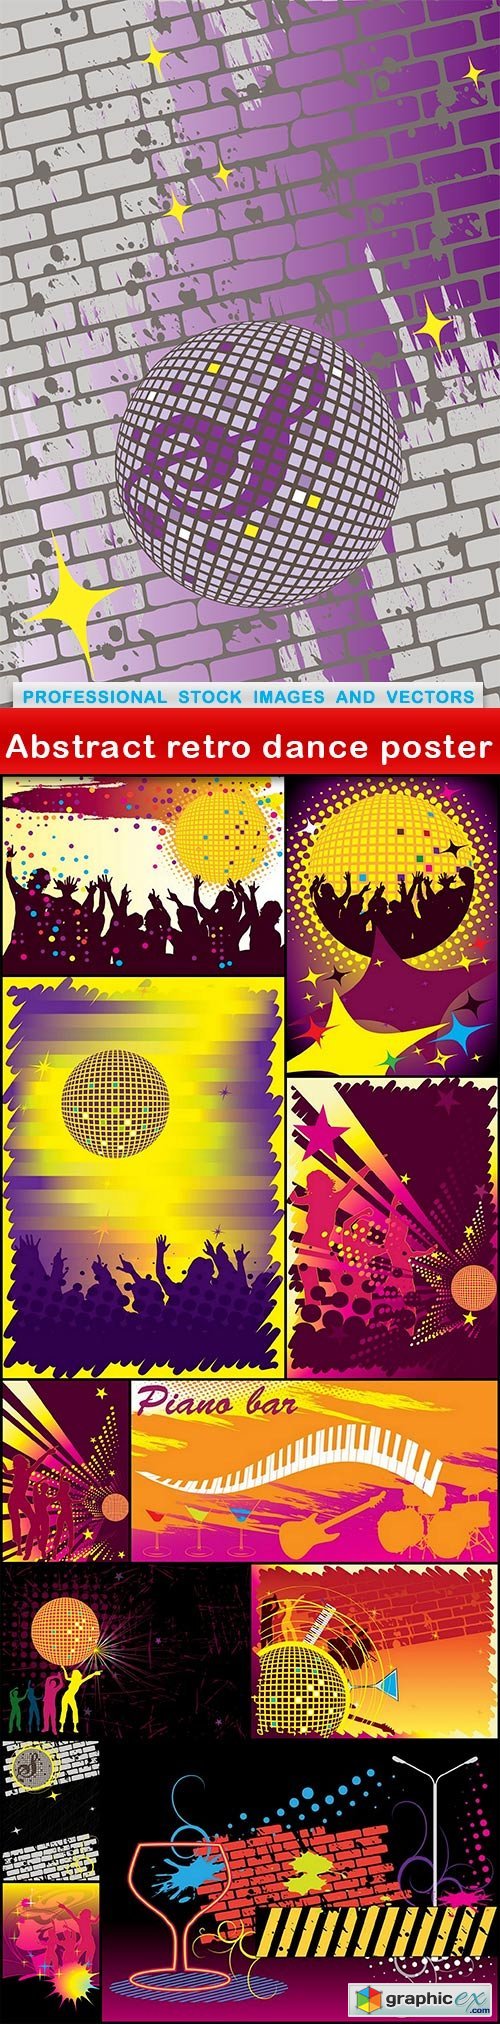 Abstract retro dance poster - 12 EPS